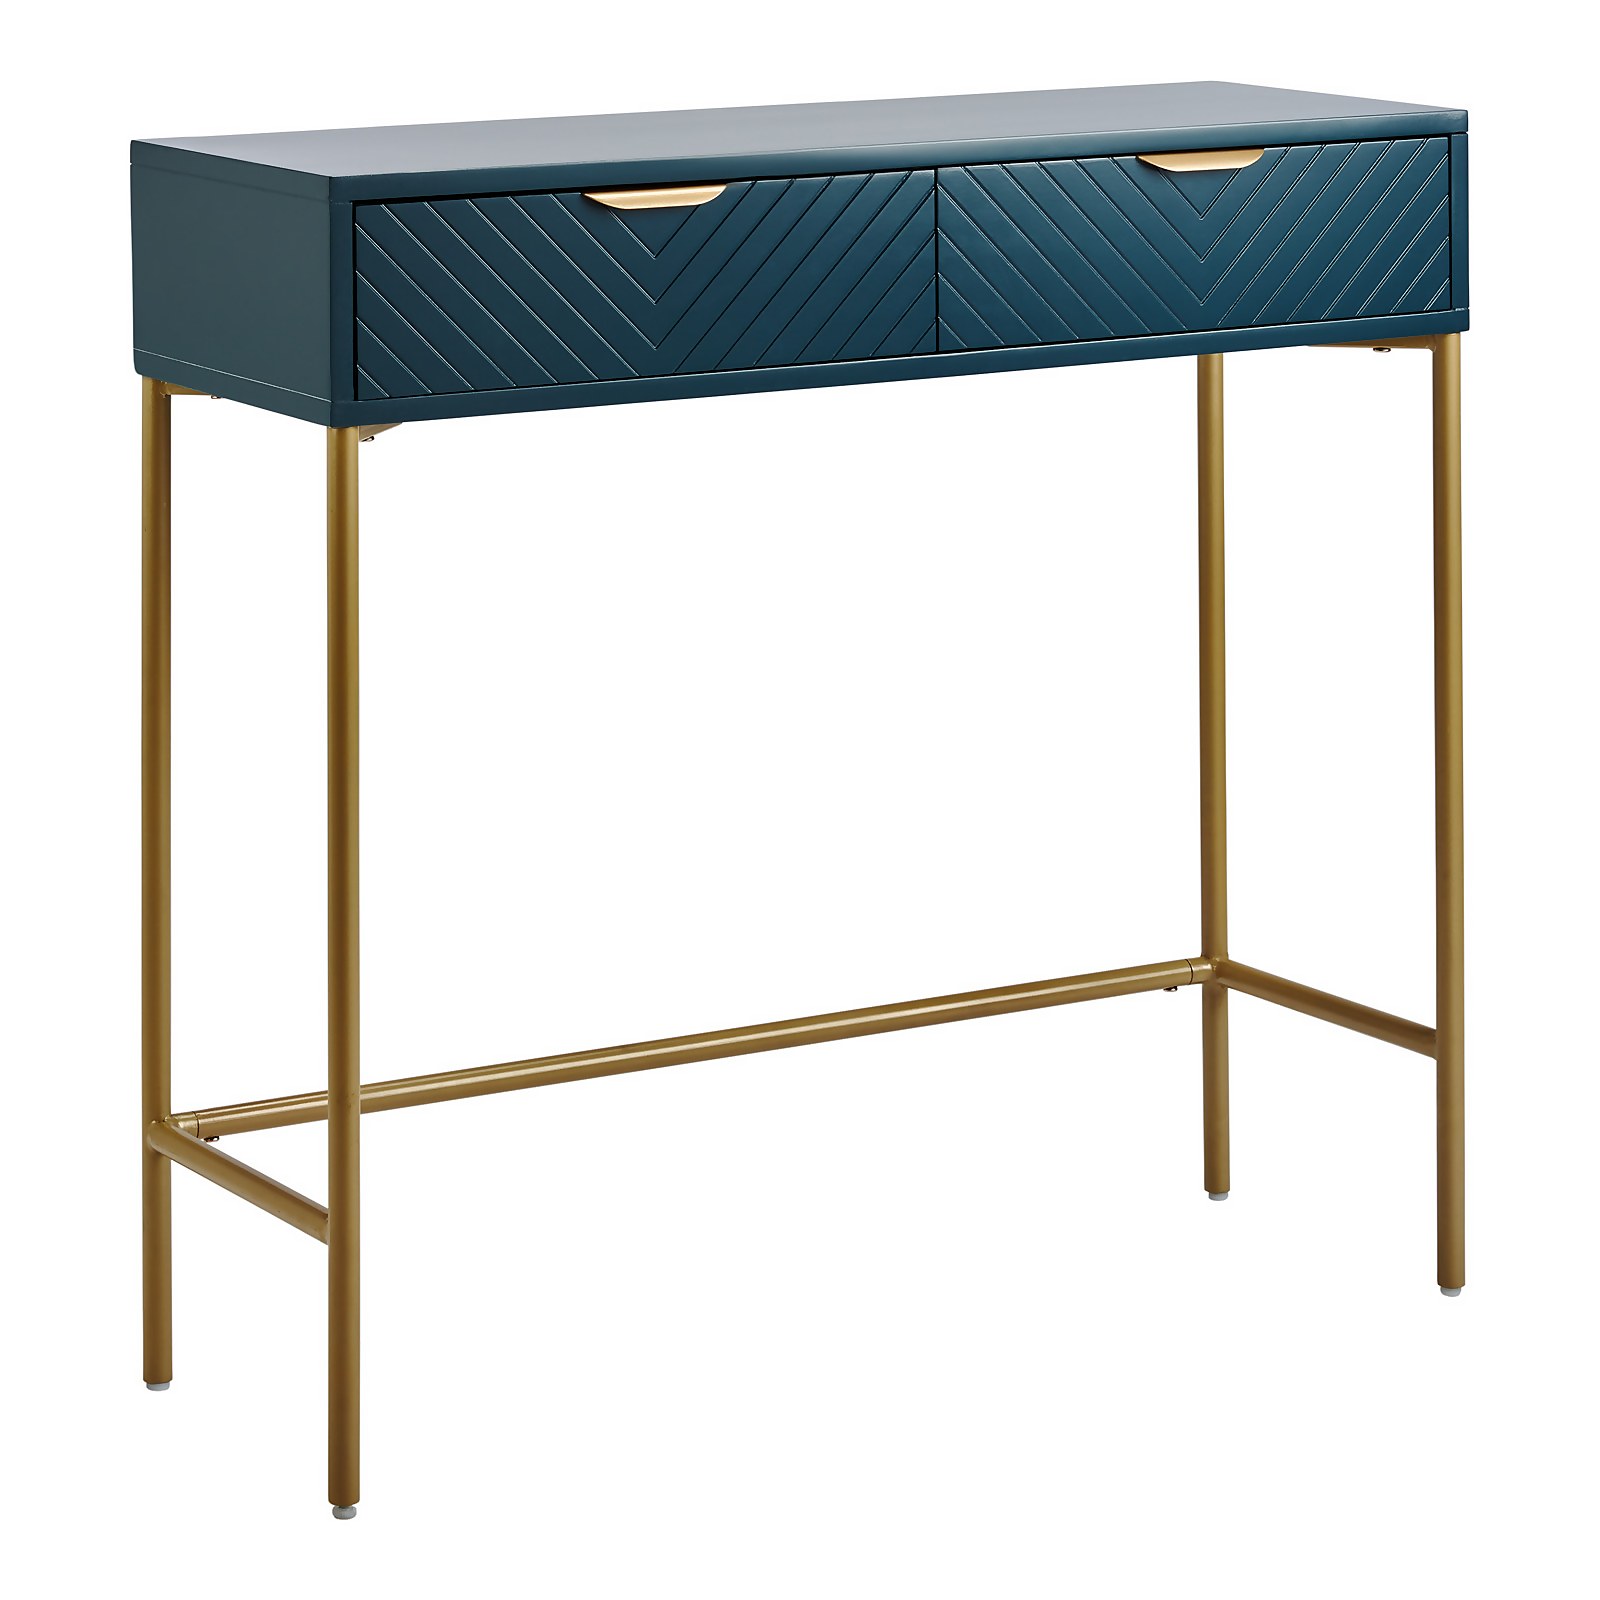 Photo of House Beautiful Trixie 2 Drawer Console Desk - Blue